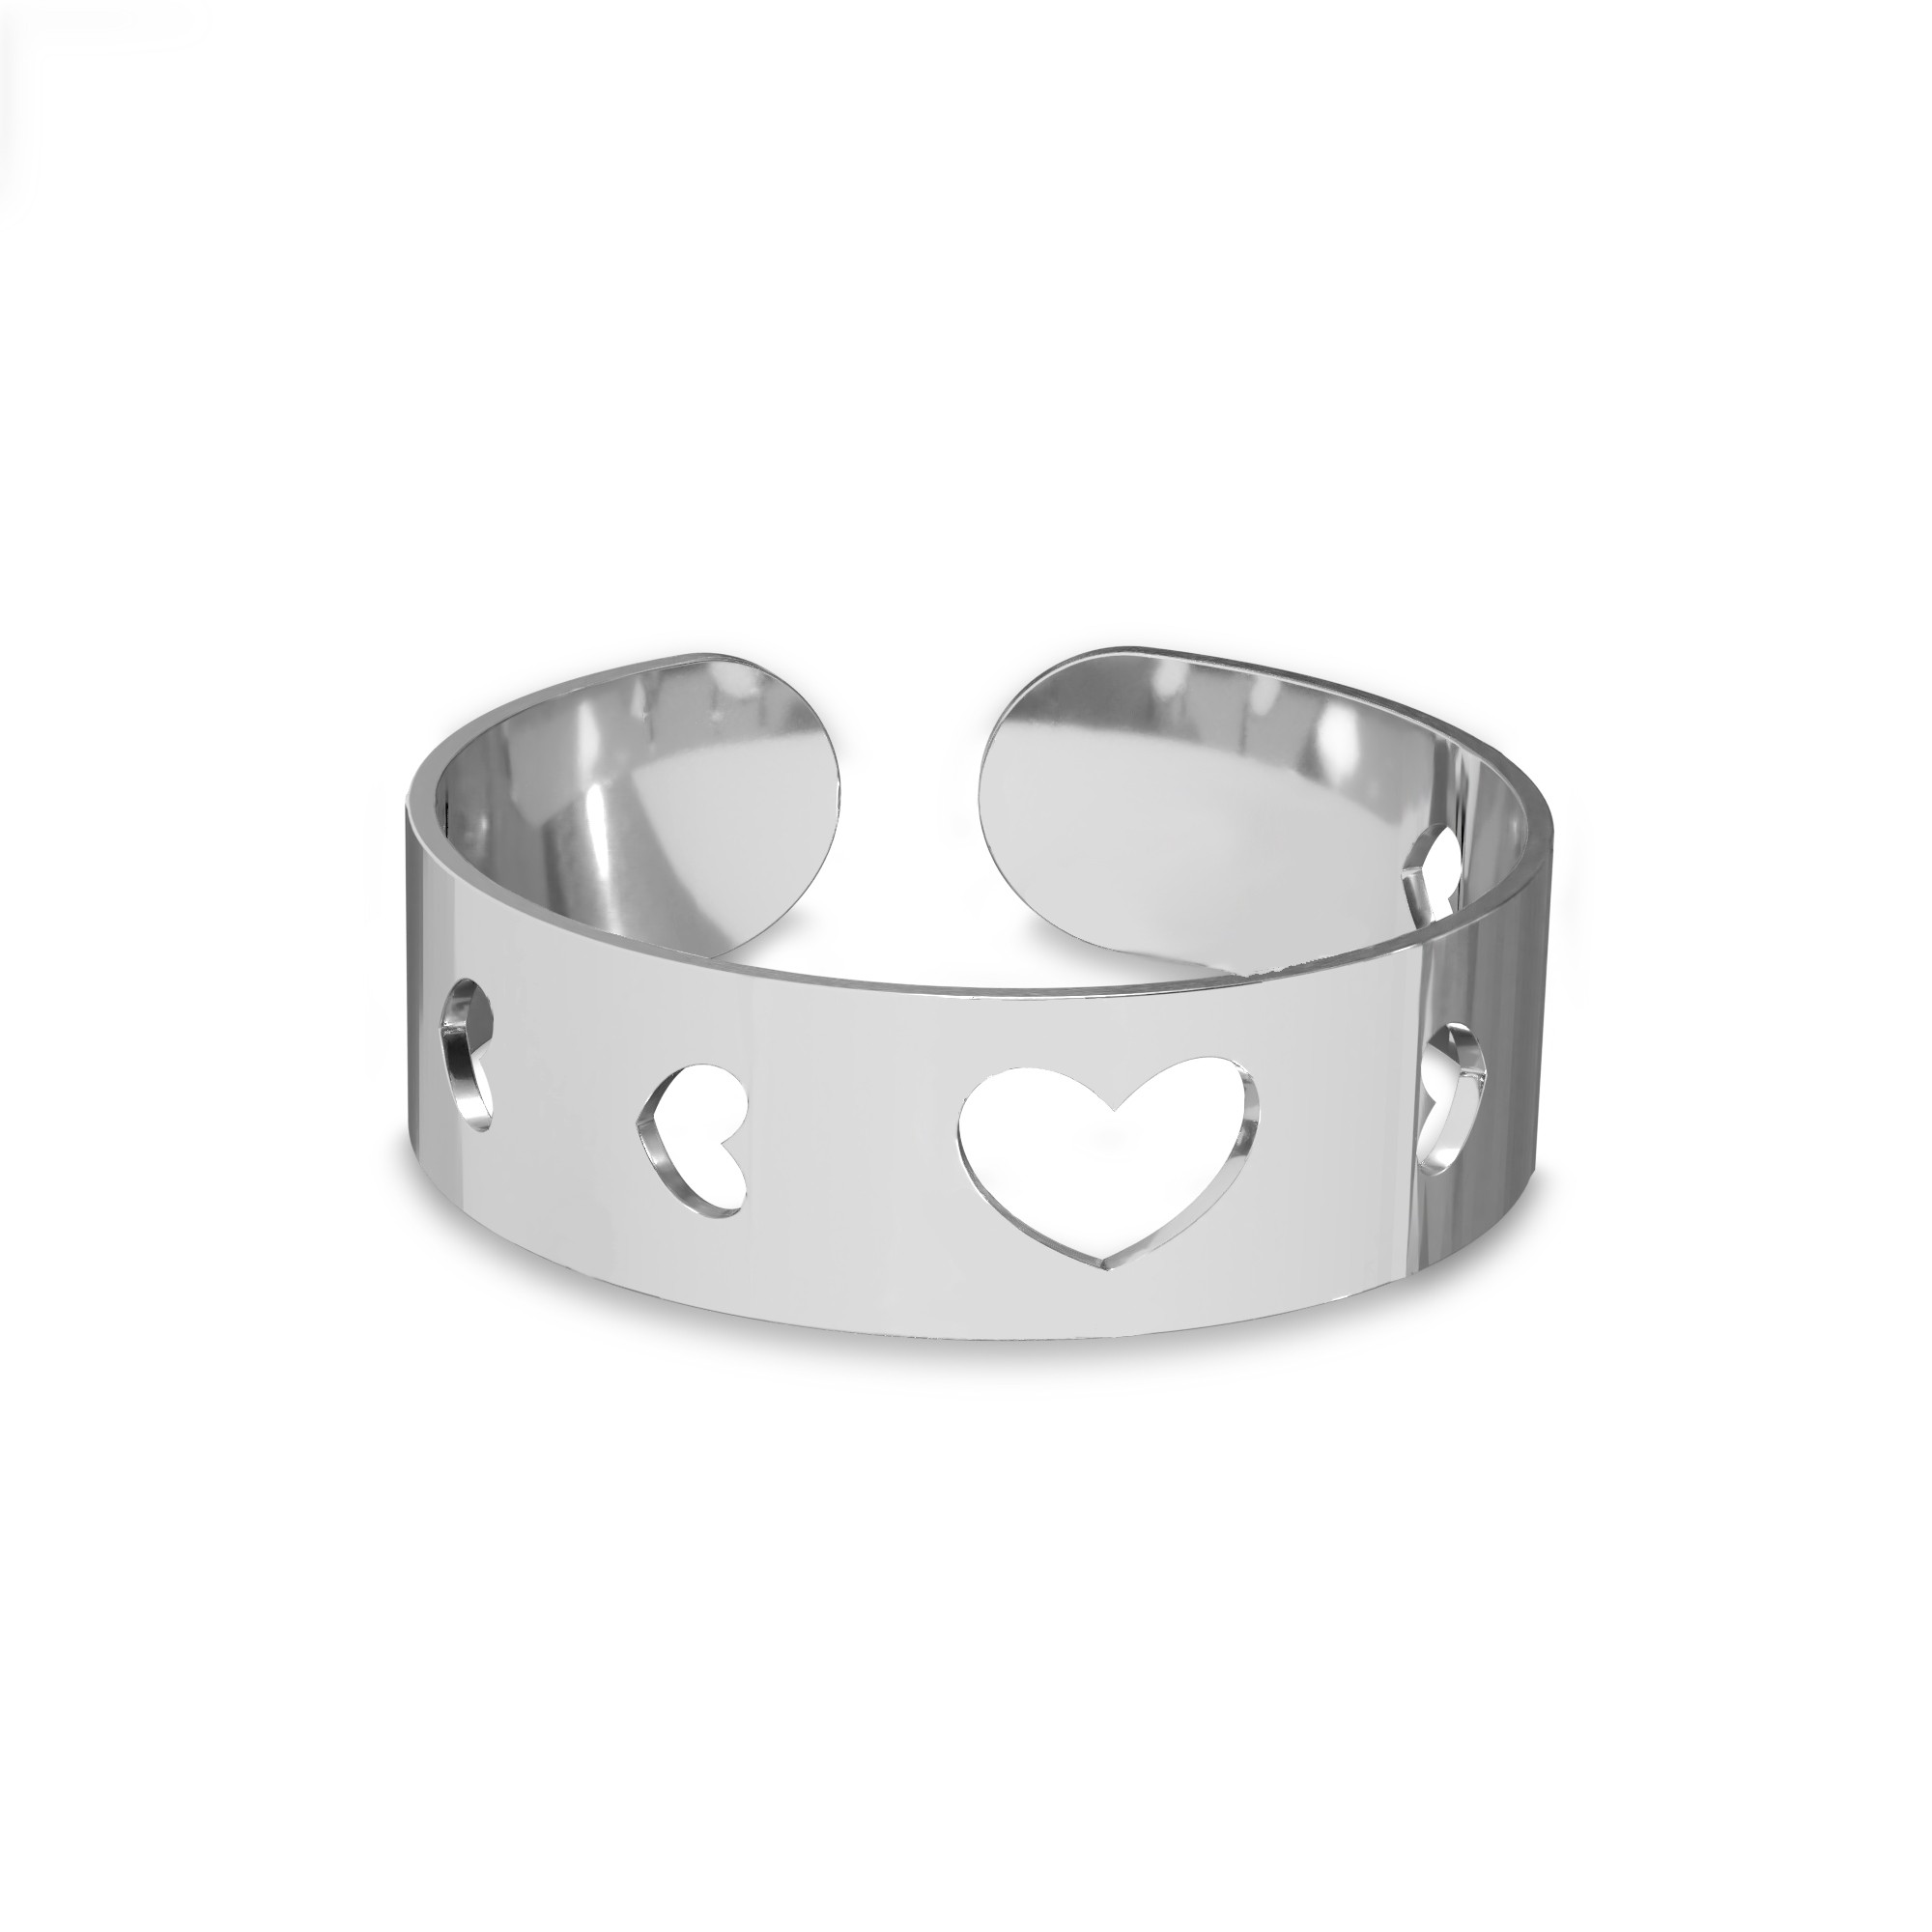 Knuckle ring with heart, sterling silver 925